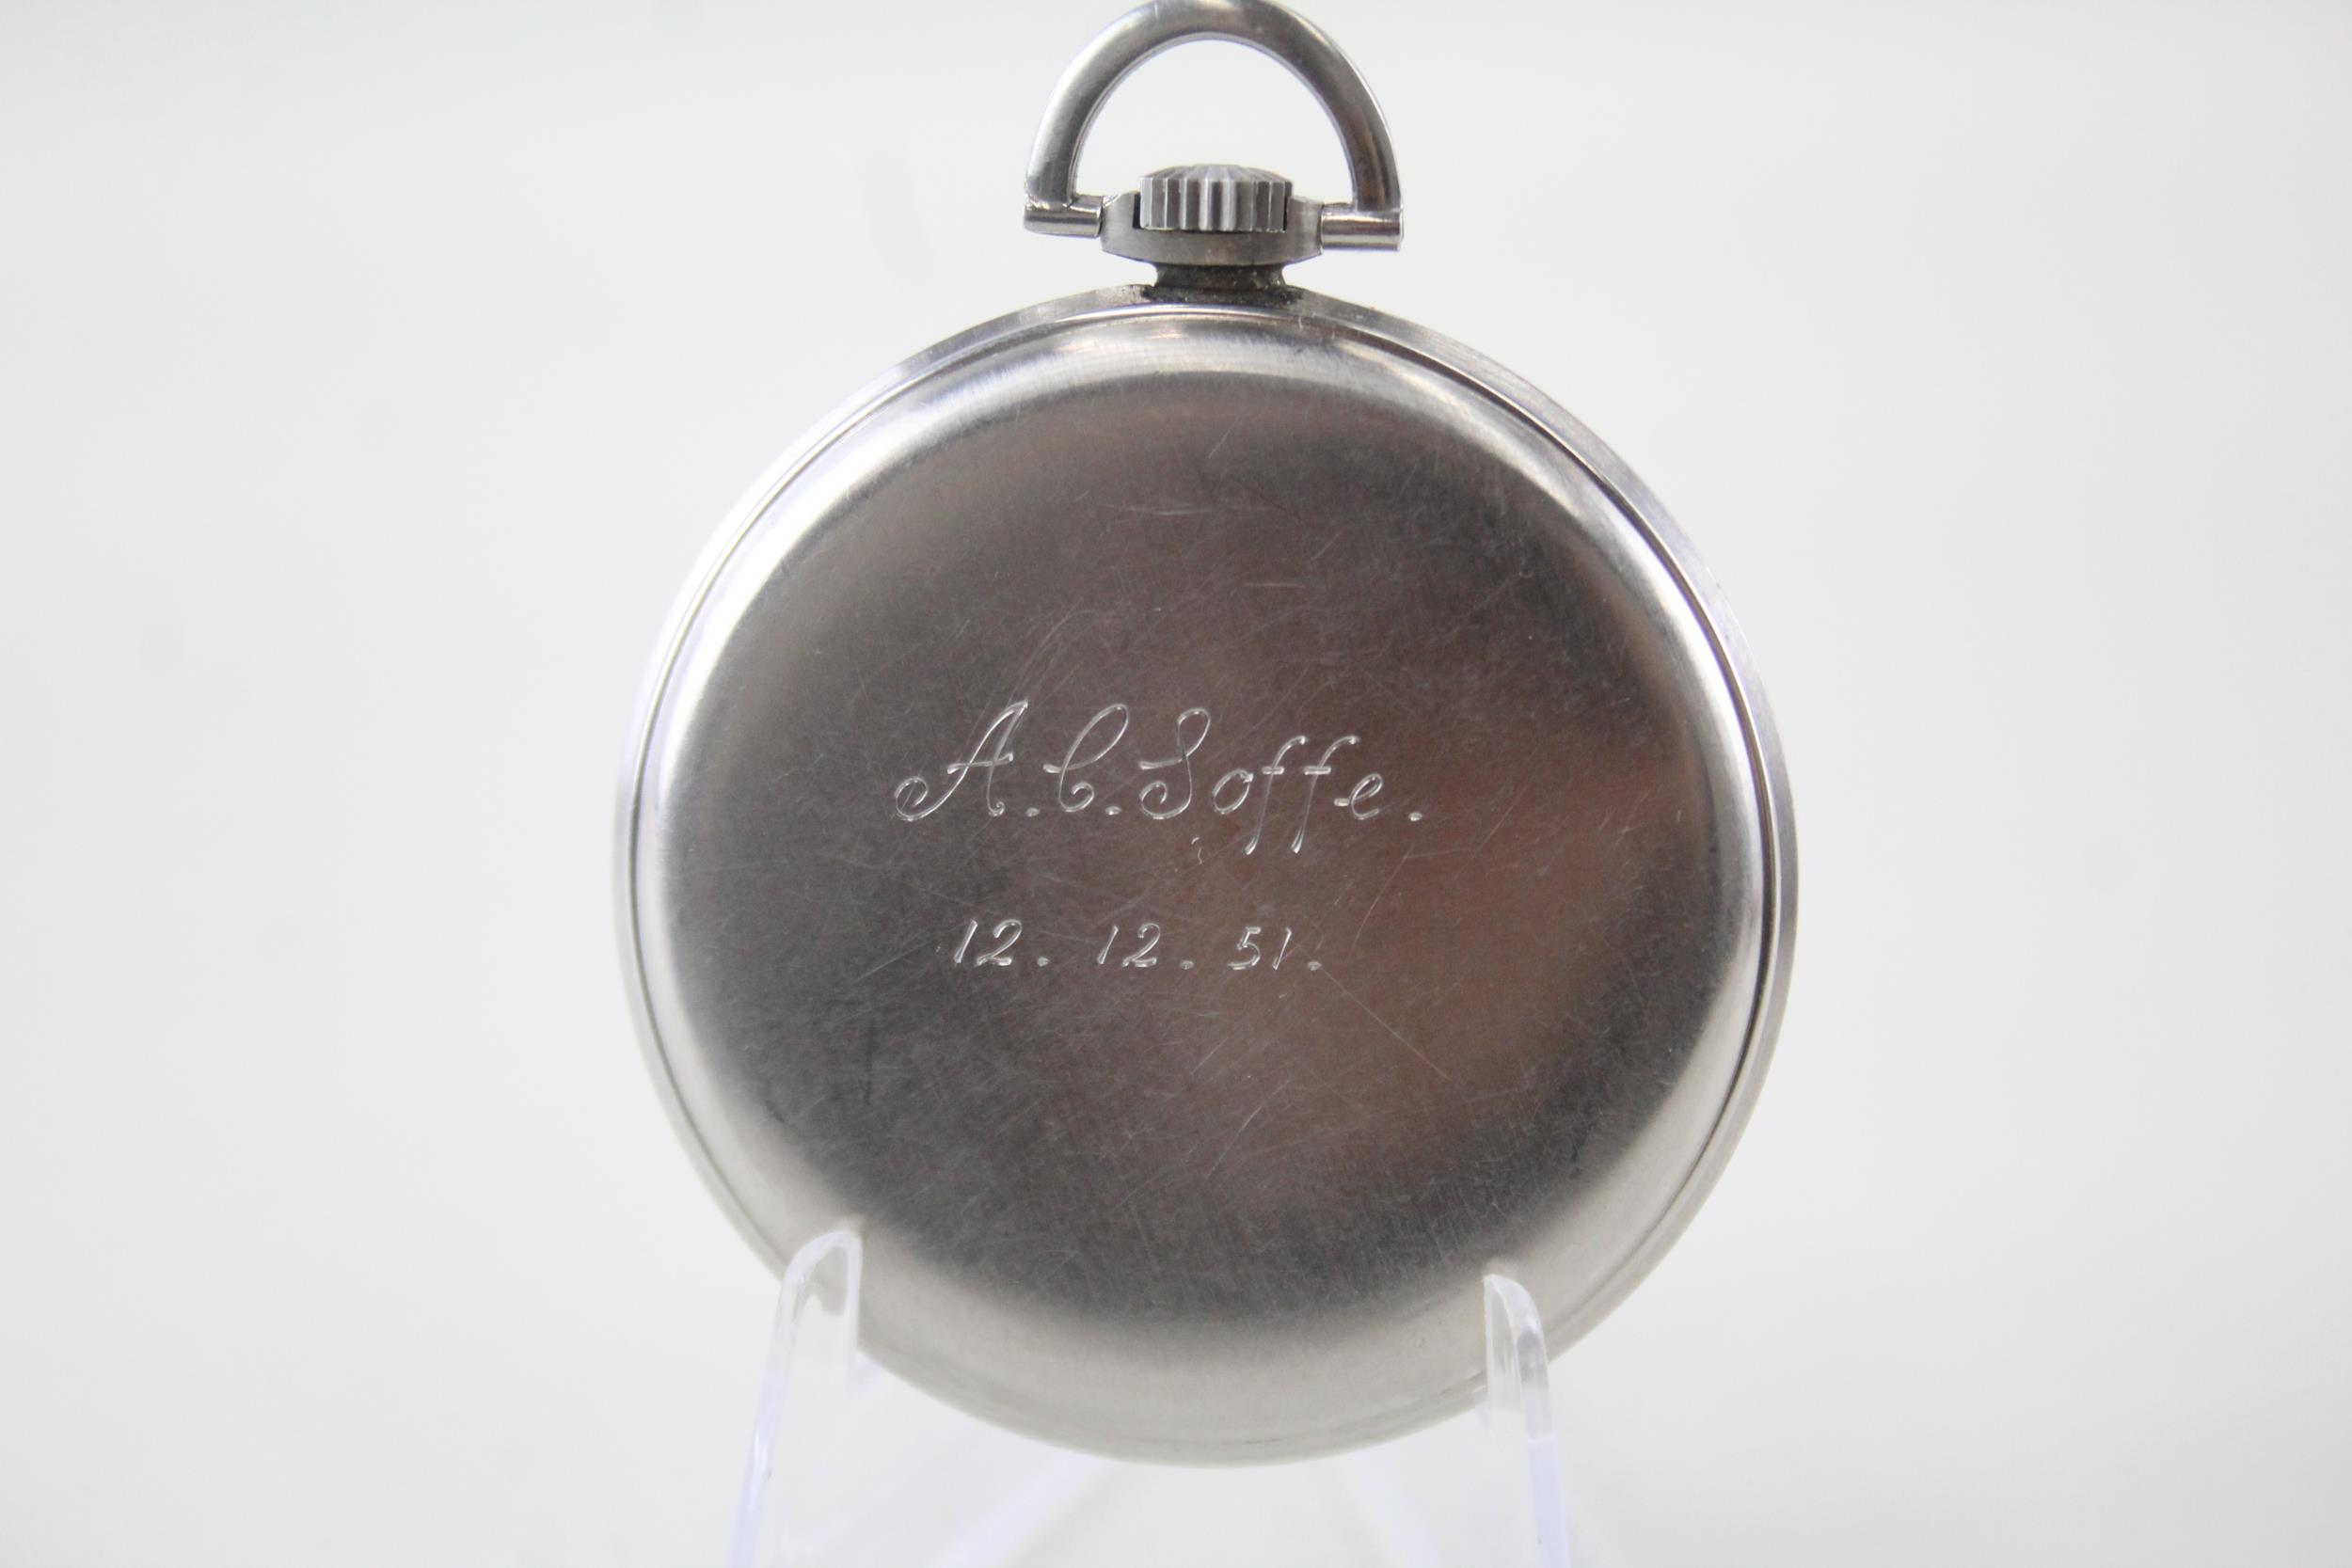 LONGINES Gents Vintage Open Face Pocket Watch Hand-wind WORKING Boxed - LONGINES Gents Vintage - Image 3 of 4